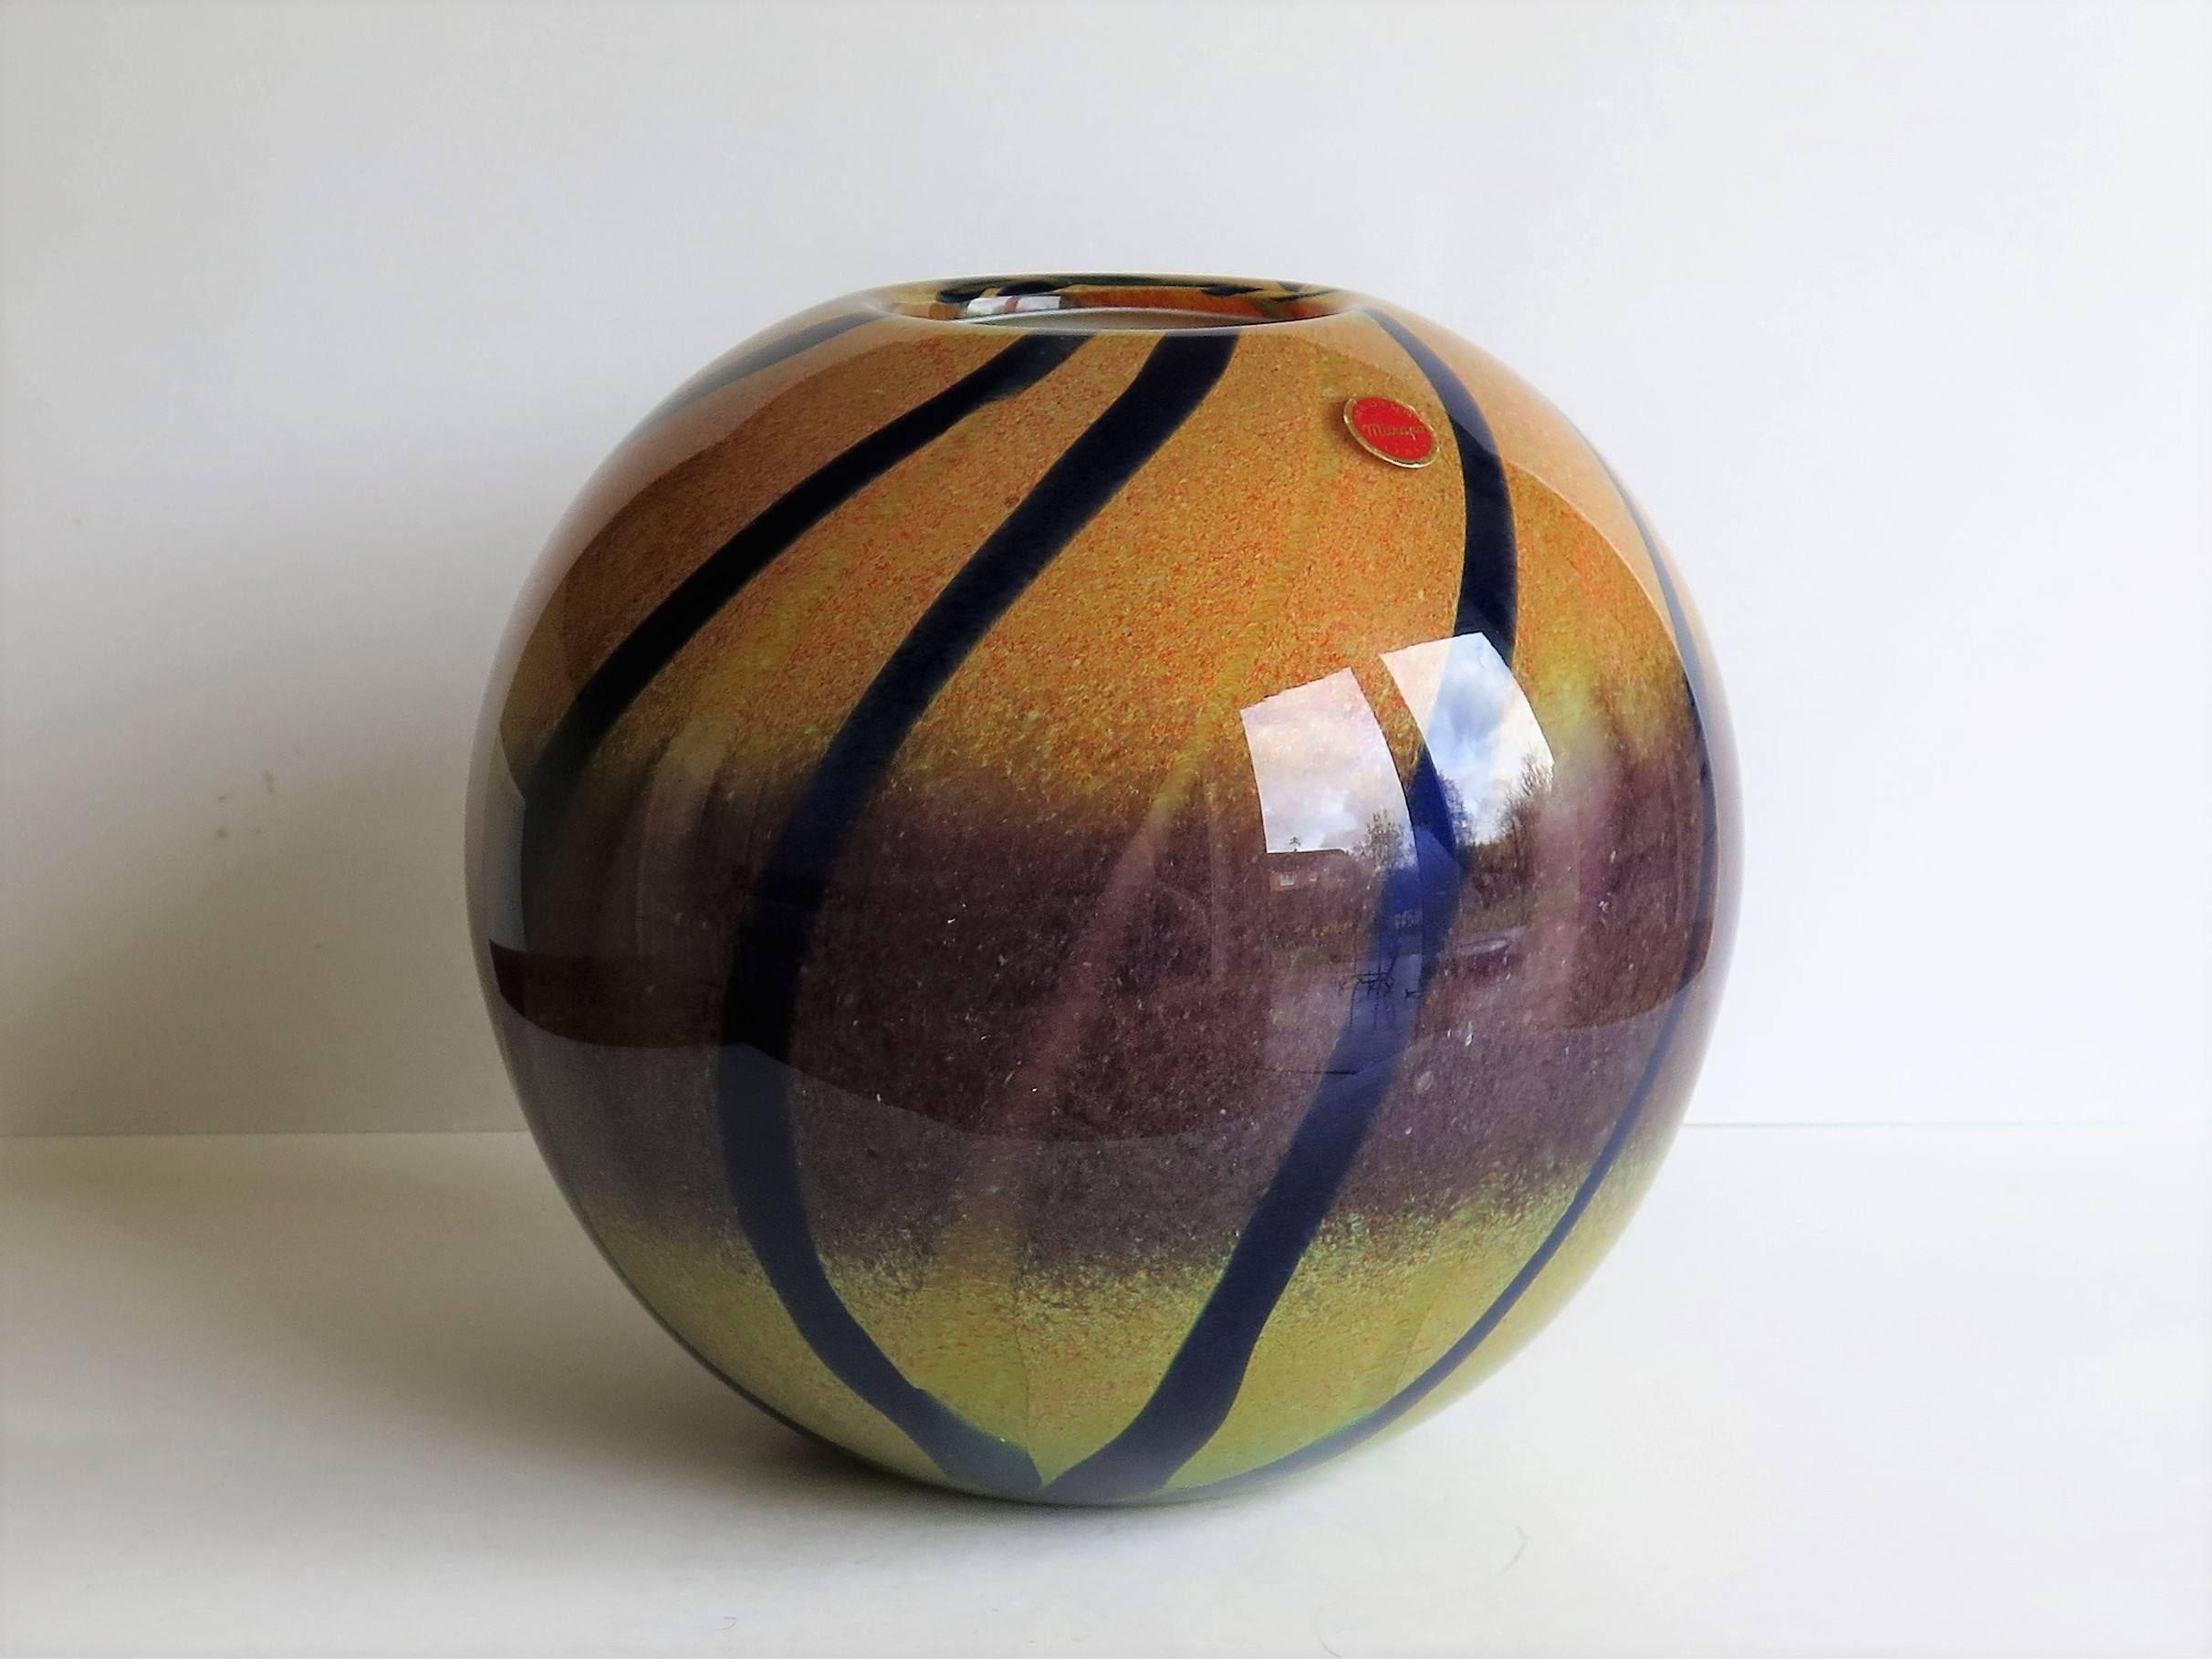 This is a beautiful Murano vase with a stunning mix of colors, having yellow with orange flecks to the top changing to a mauve / lilac in the middle section and yellow turning to light green at the base all in slightly varying shades. It then has